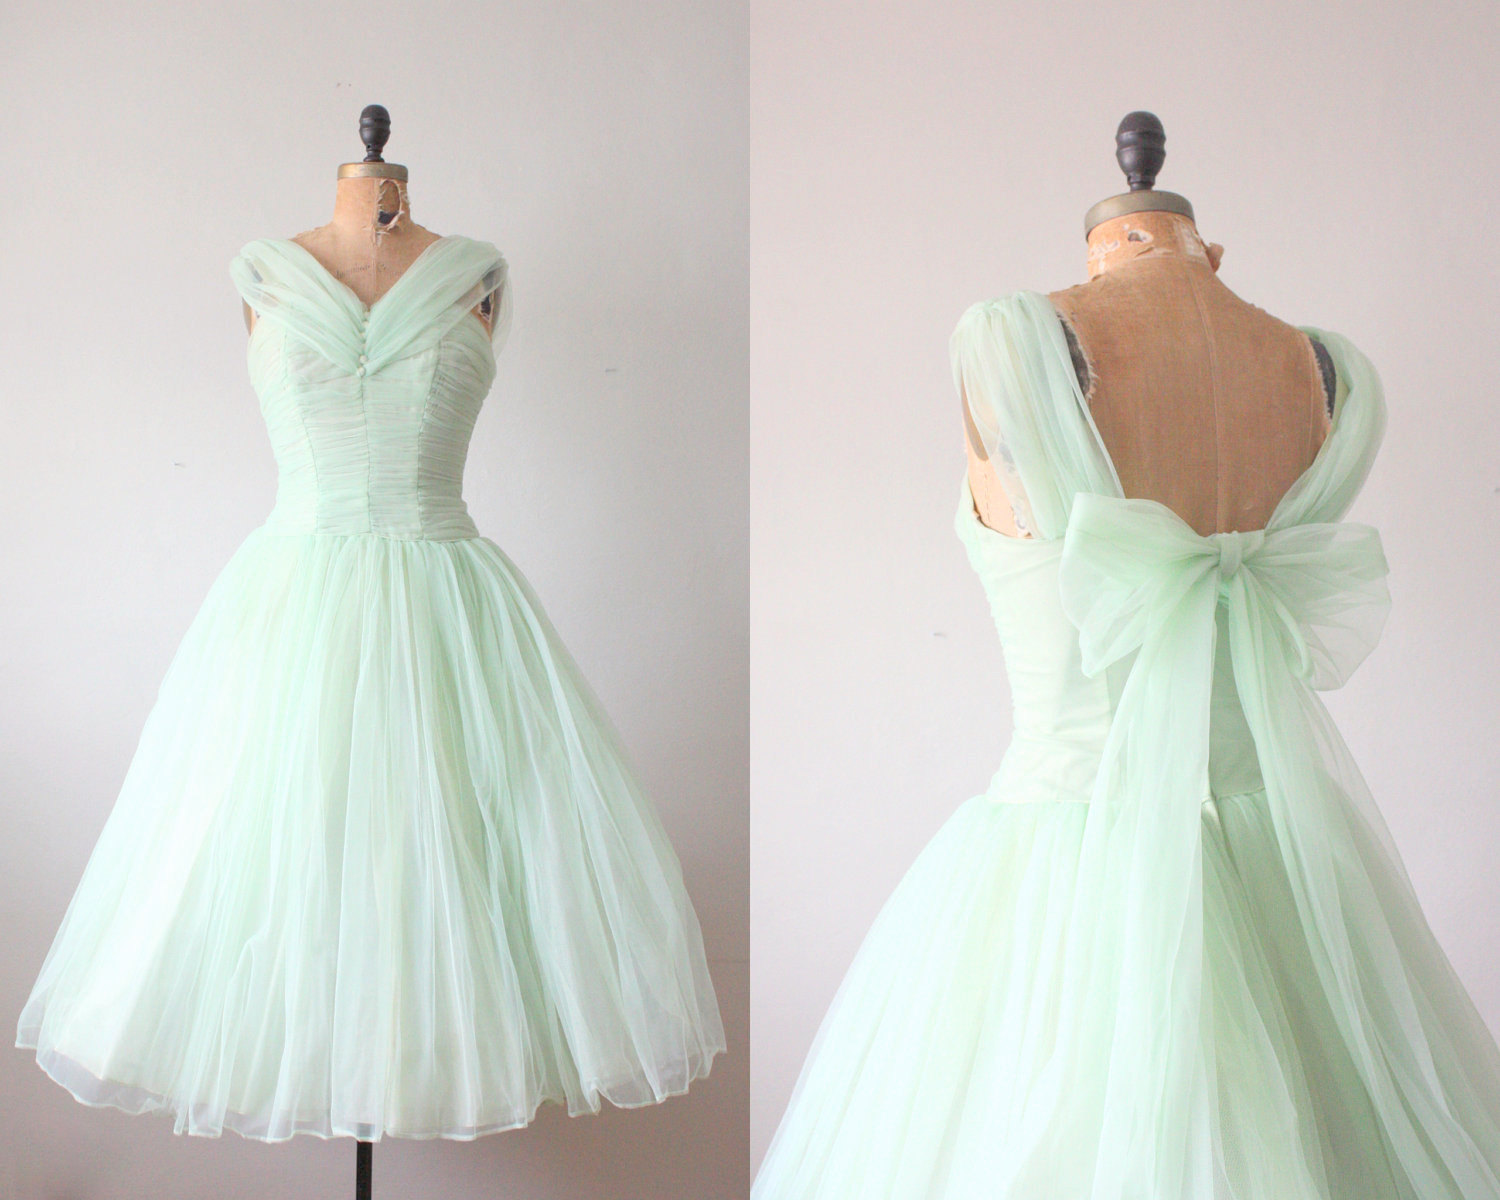 2013 Trending Color For Spring and Summer Weddings Is Mint Green